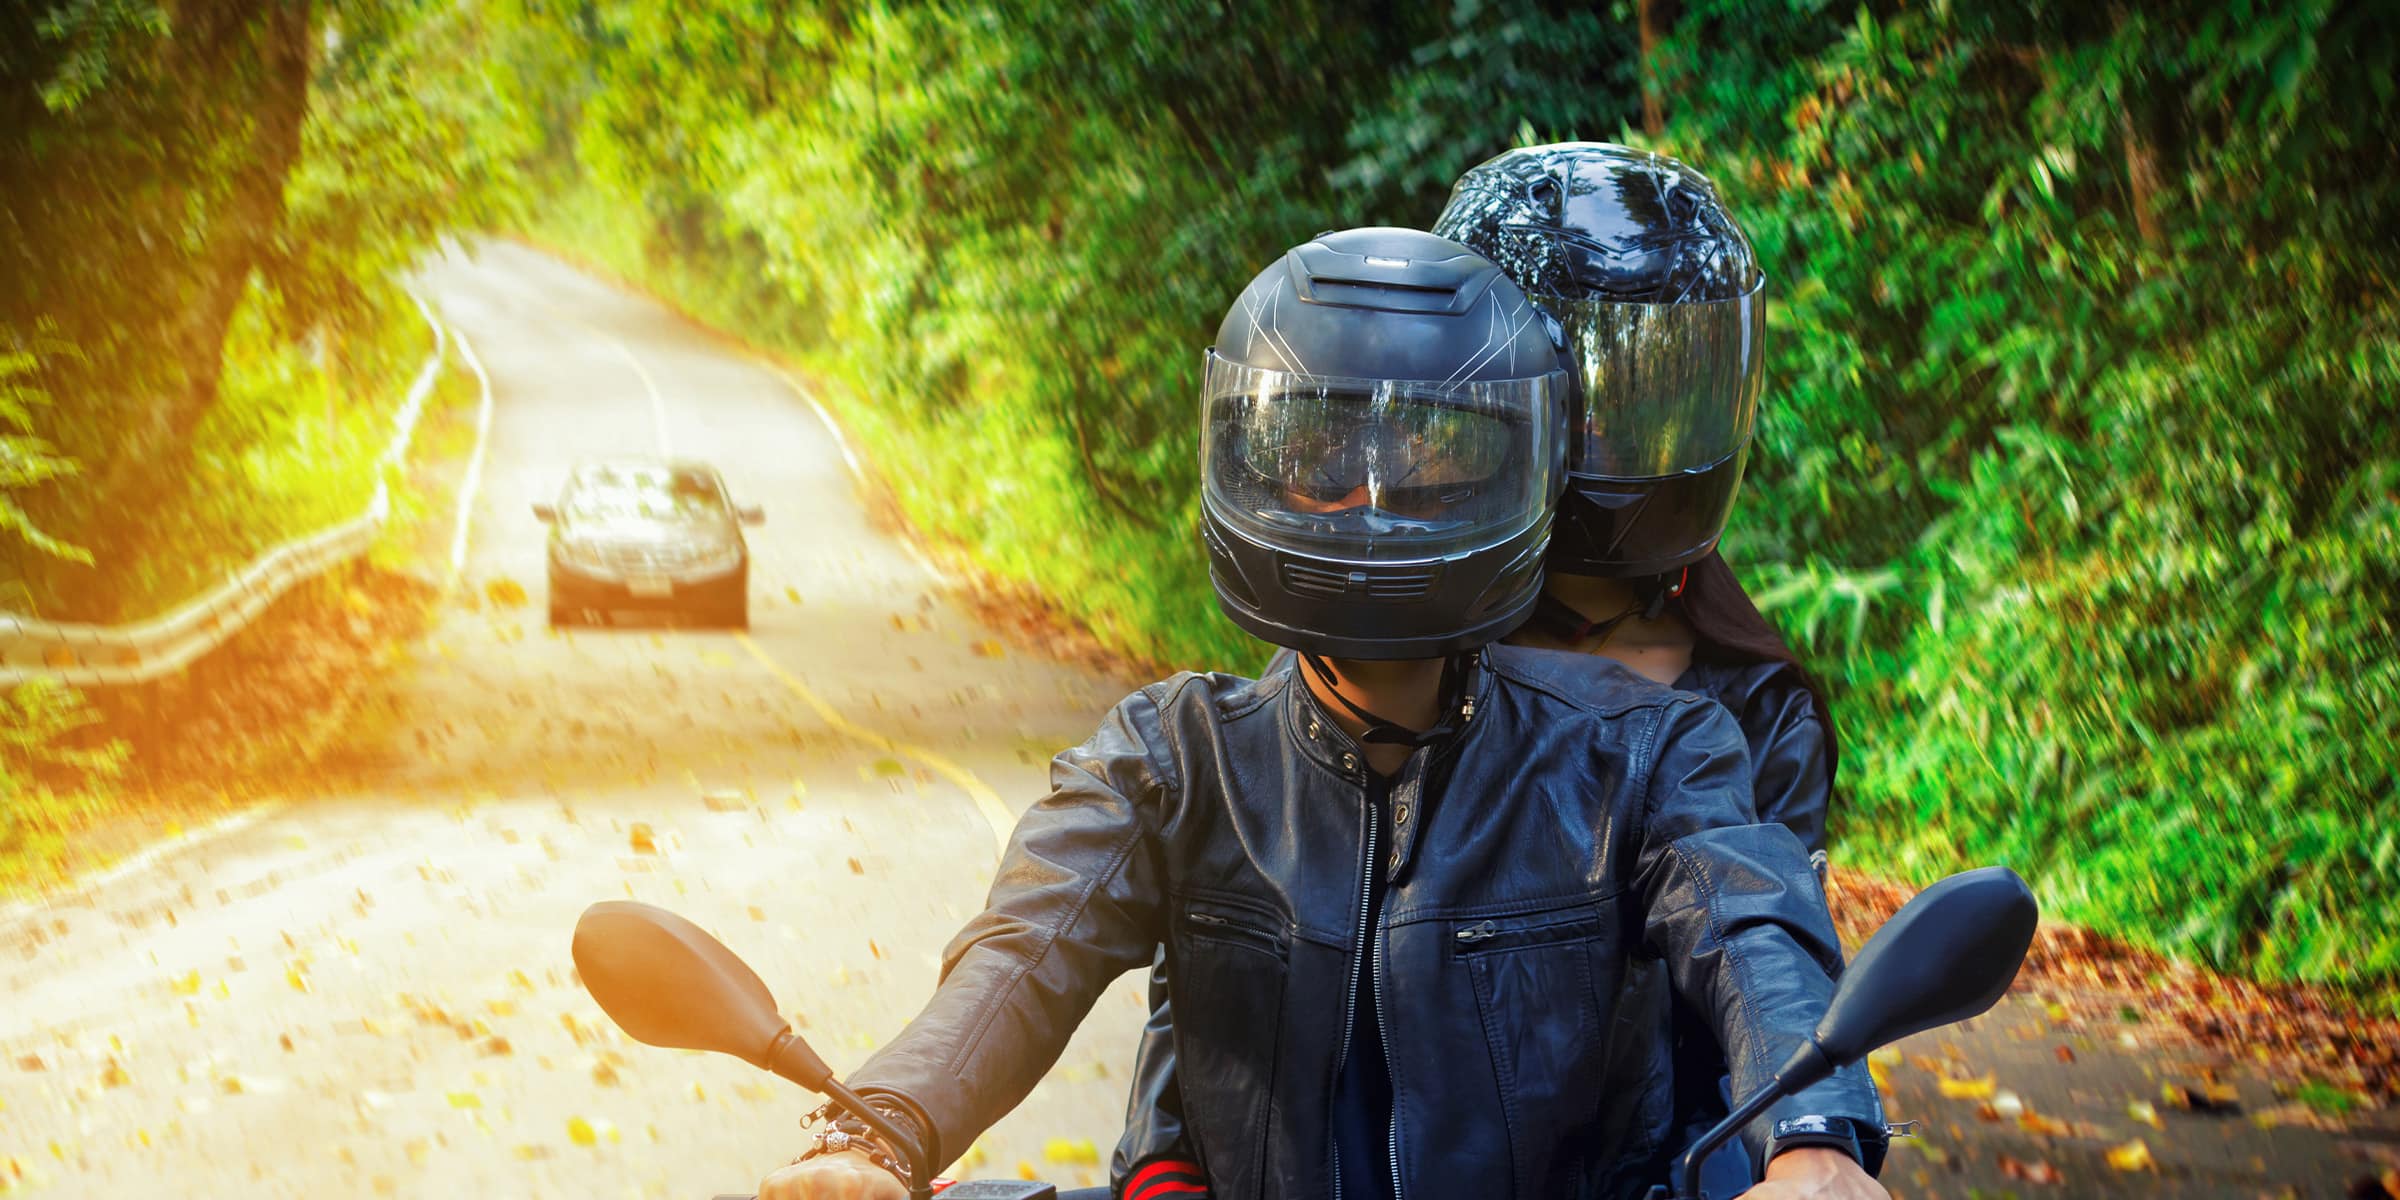 Helmet Laws by State - Motorcycle Safety Lawyers